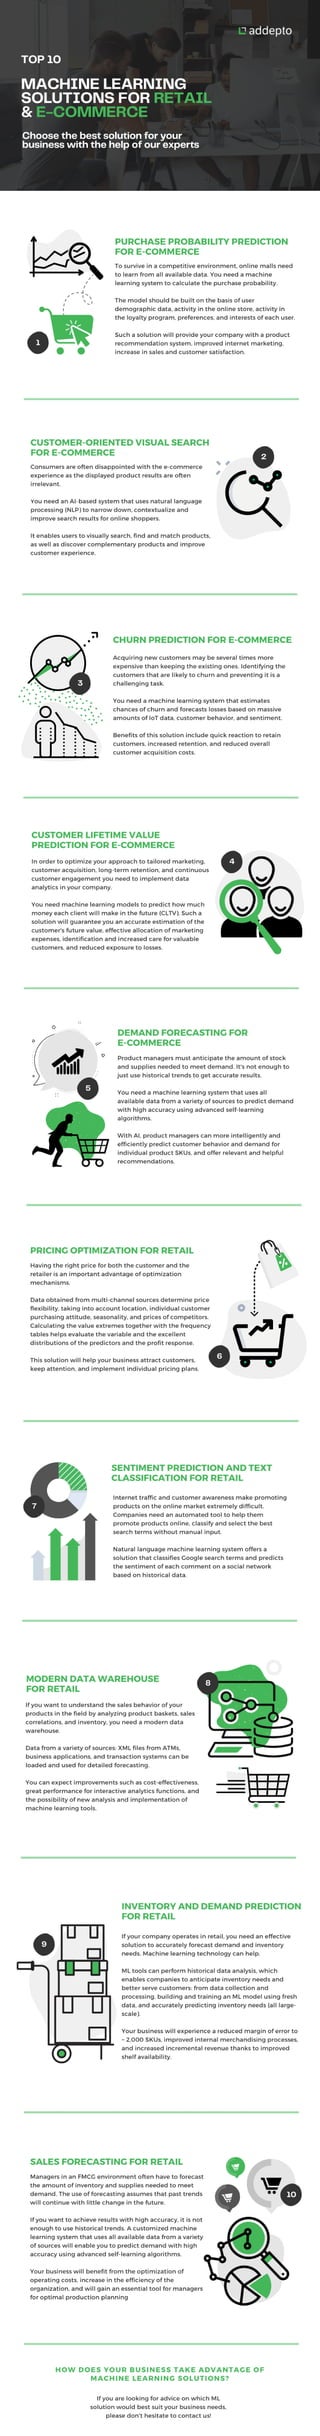 Top 10 Machine Learning Solutions For Retail & E-commerce - INFOGRAPHIC